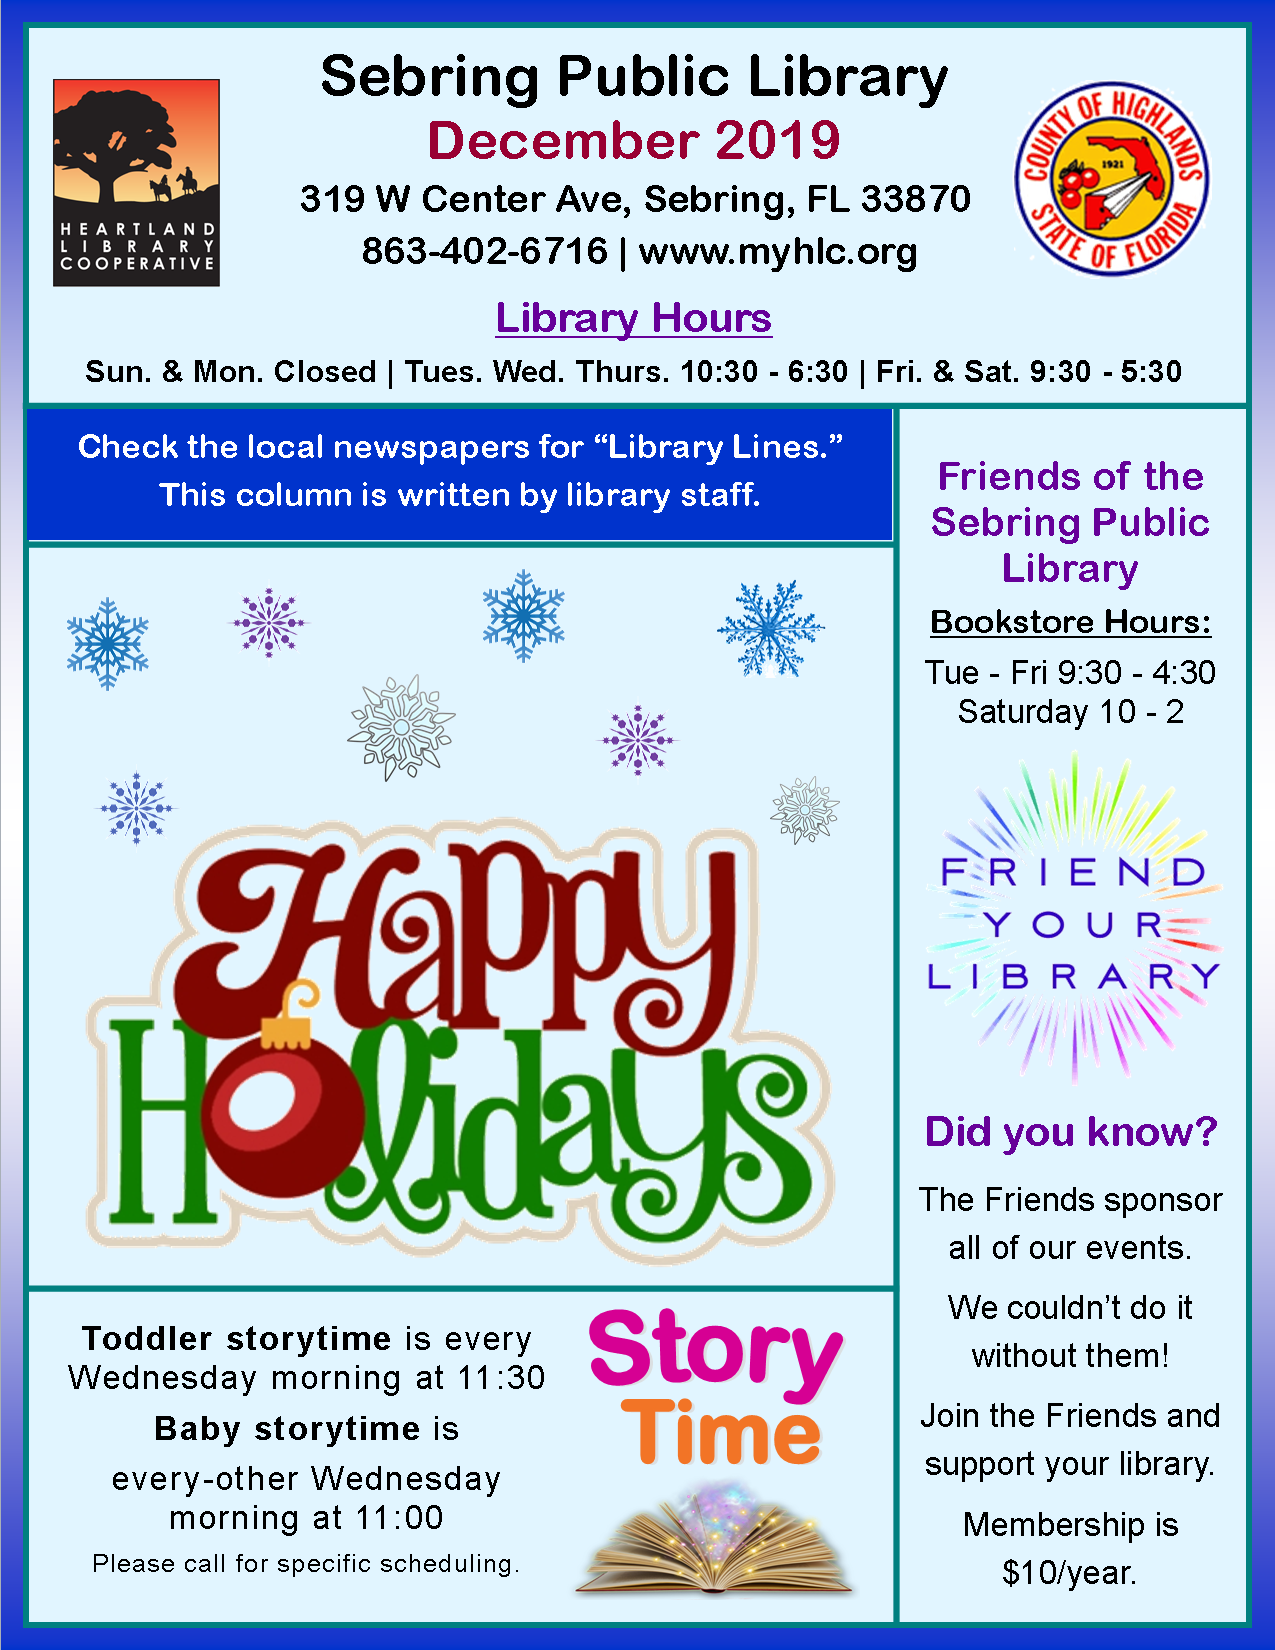 This month at the Sebring Public Library:       Toddler storytime Wednesday mornings at 11:30 a.m except for Christmas Day.     Baby storytime will be on Wednesday, December 11, at 11 a.m.     Adult coloring group every Friday at 10 a.m..      S.T.E.A.M night is Friday, December 13, at 4:00 p.m..      Family movie days are December 7 and 21, at 2:00 p.m..      At Noon on Tuesday, December 17, Peace River Center Victim Services' is hosting a Women's Empowerment Group; all females 18 years and older are welcome.     Santa will be making an appearance on Friday, December 20 at 1:30 p.m., everyone is welcome to get a free picture taken with Santa!